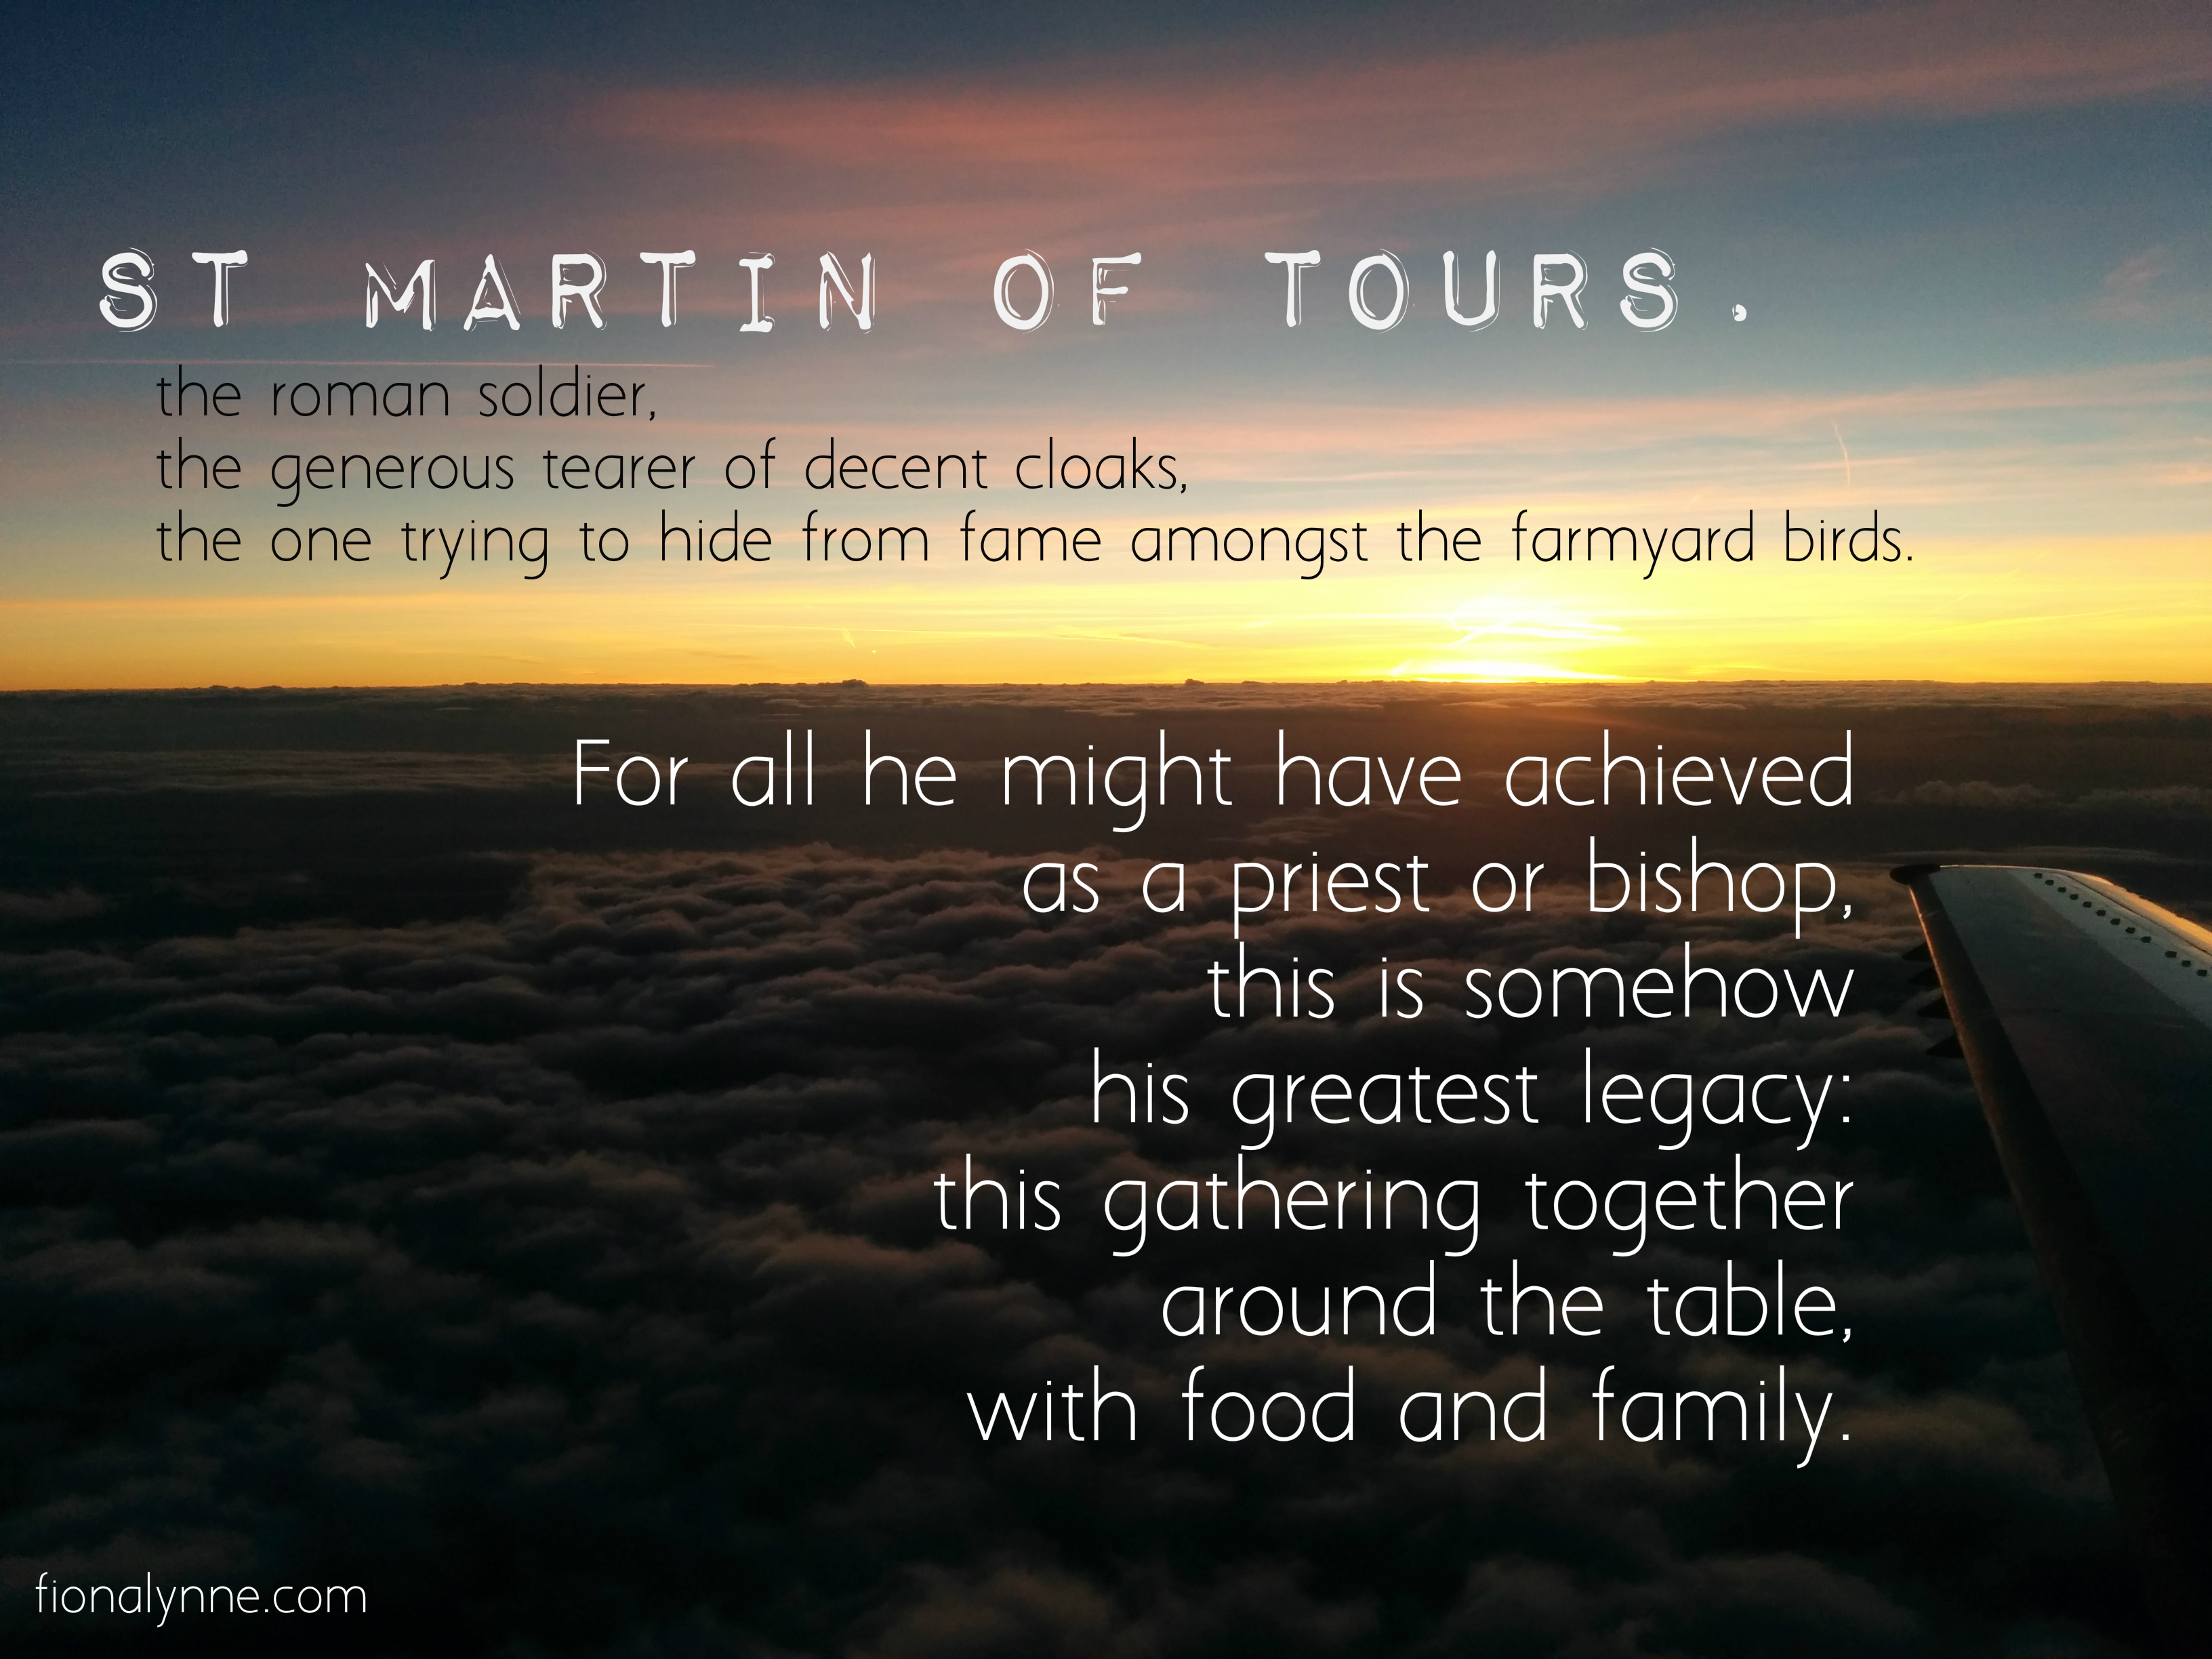 St Martin of Tours - the traditions and the stories